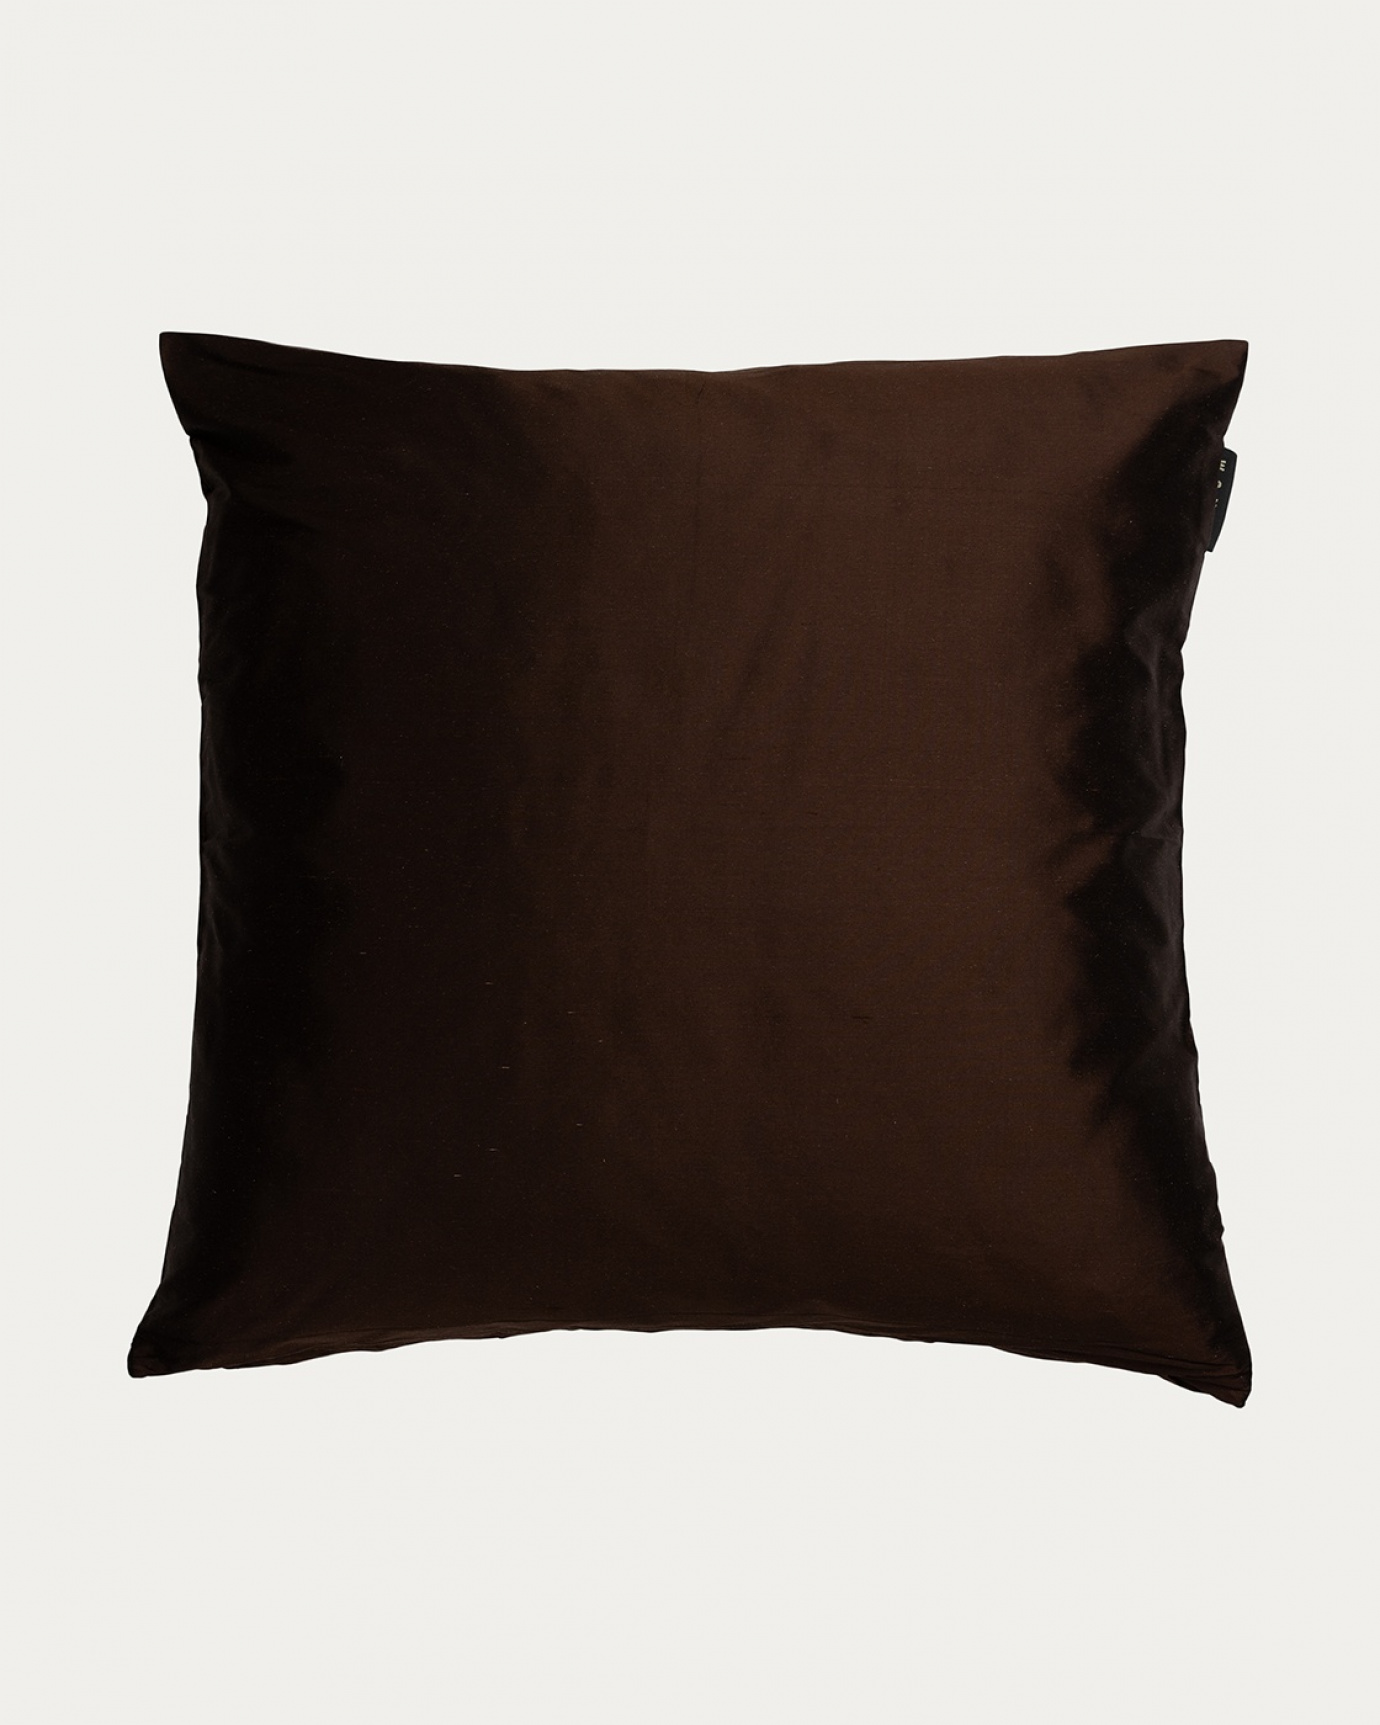 Product image warm dark brown DUPION cushion cover made of 100% dupion silk from LINUM DESIGN. Size 50x50 cm.